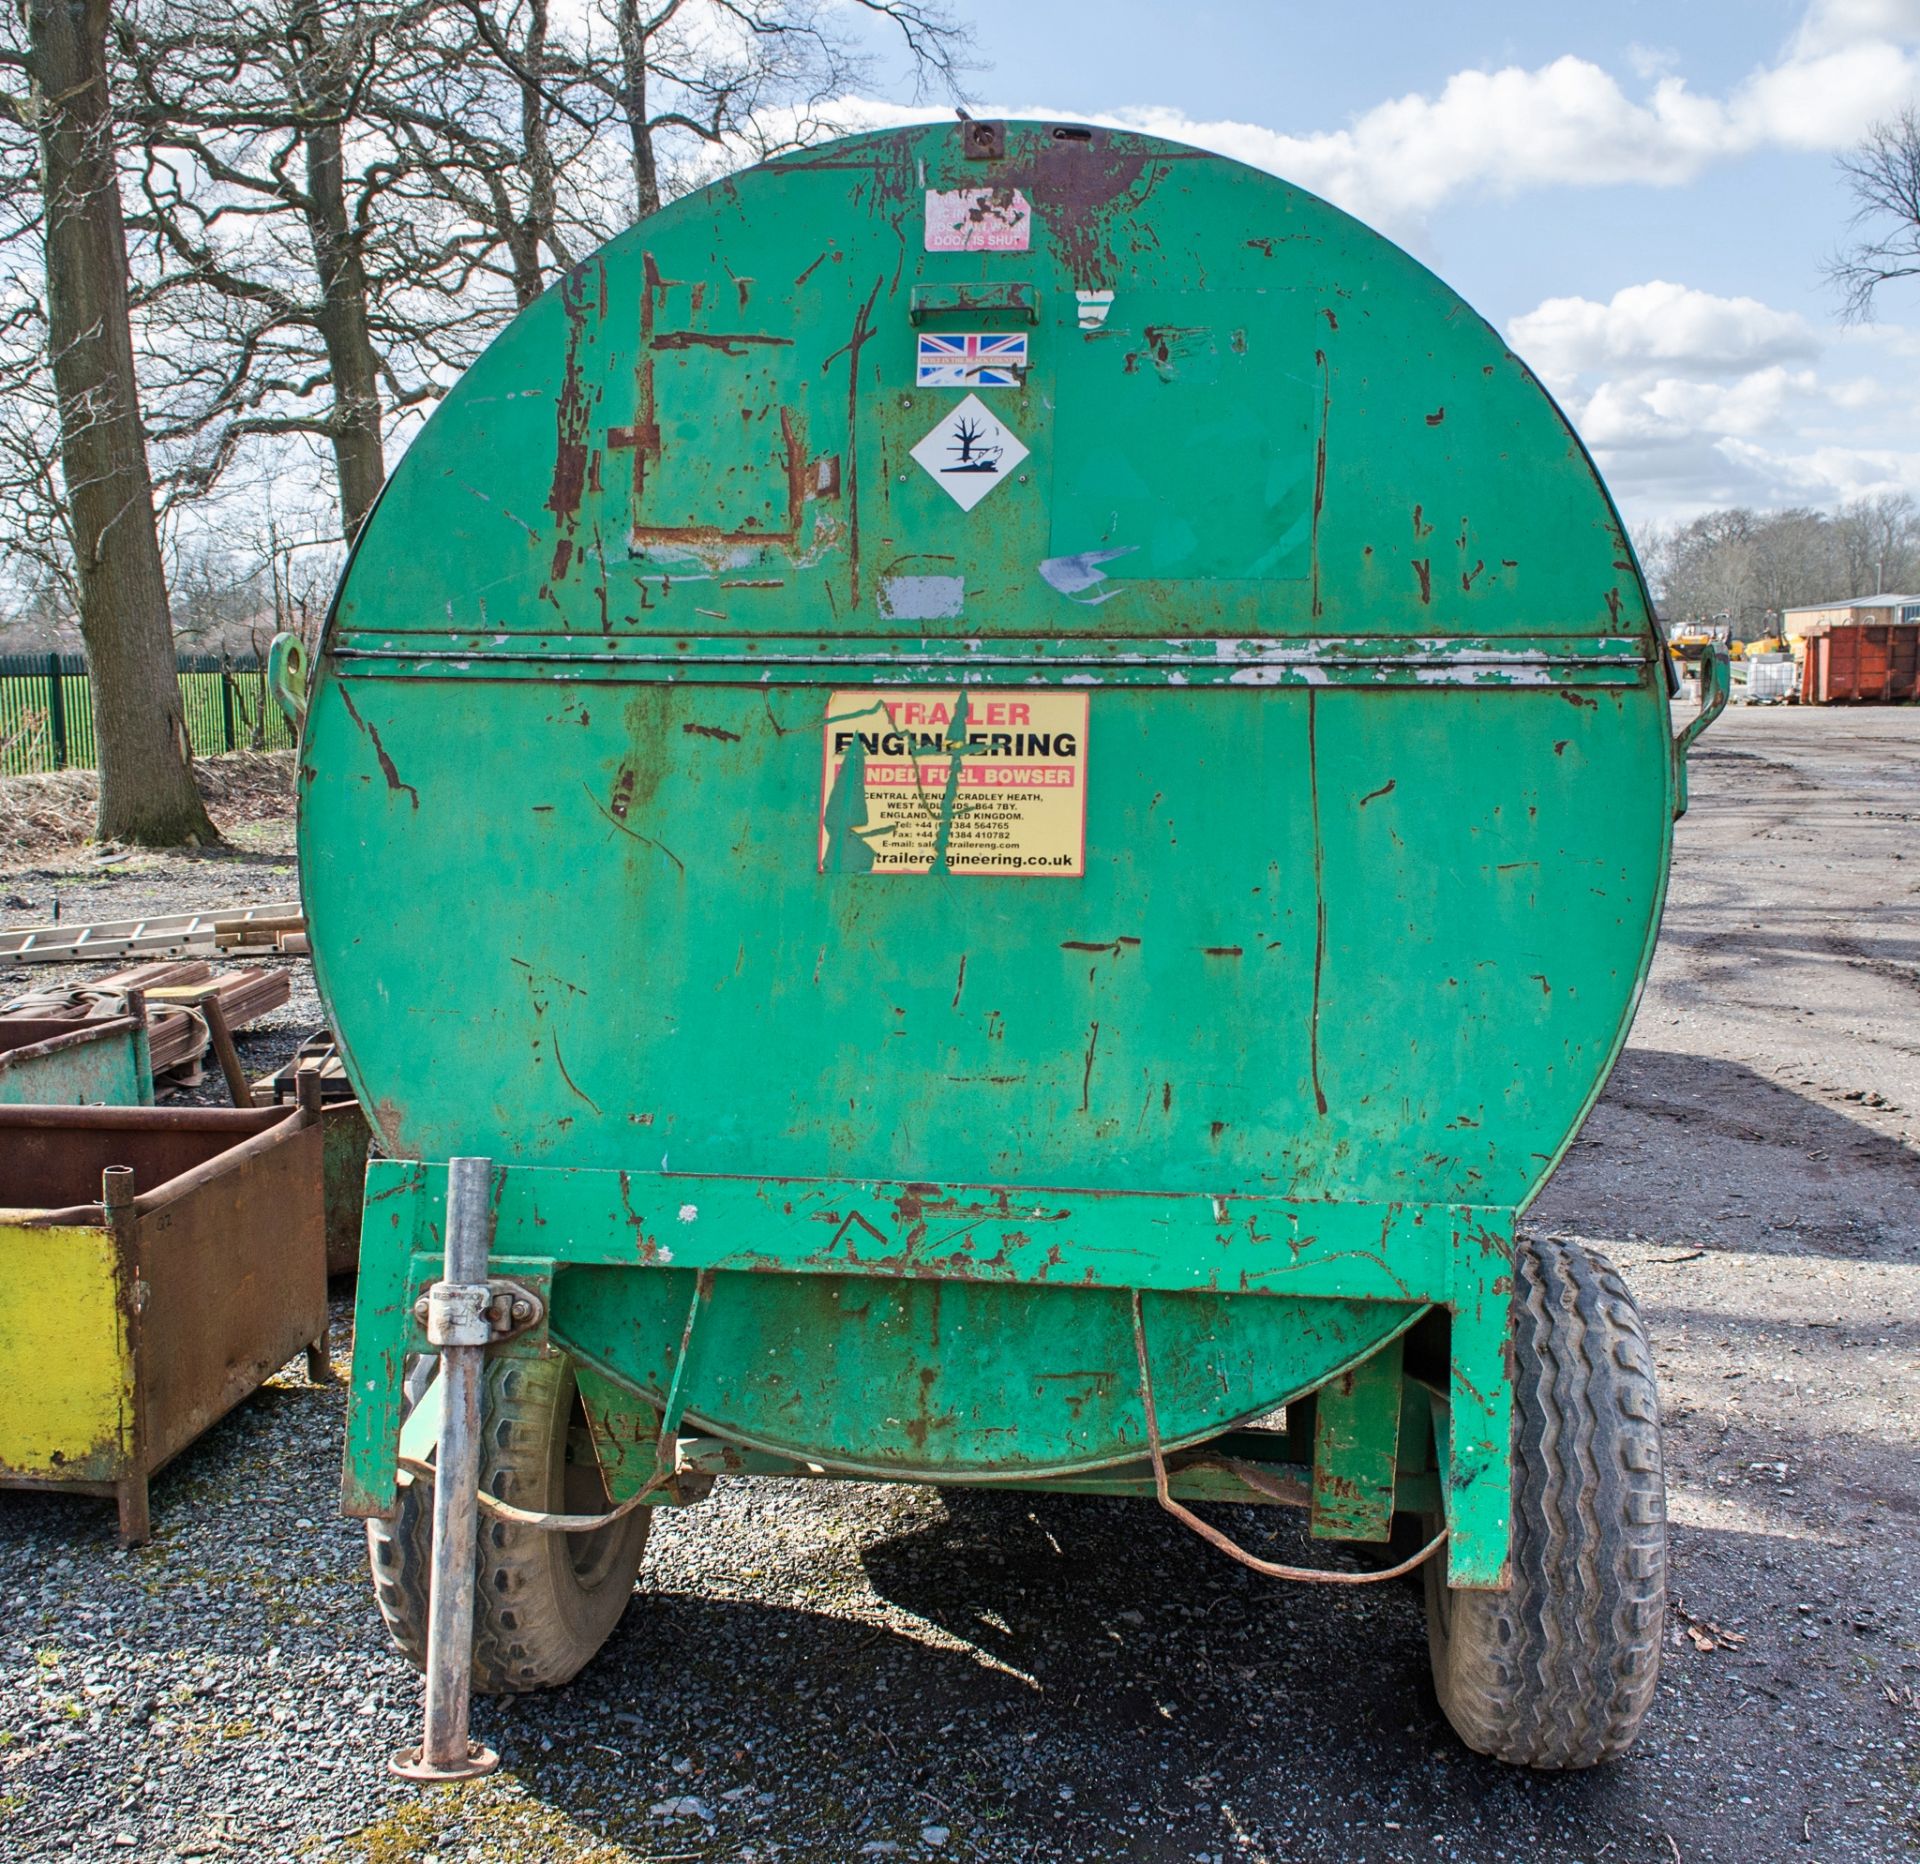 Trailer Engineering 2140 litre site tow mobile bunded fuel bowser c/w manual fuel pump, delivery - Image 4 of 5